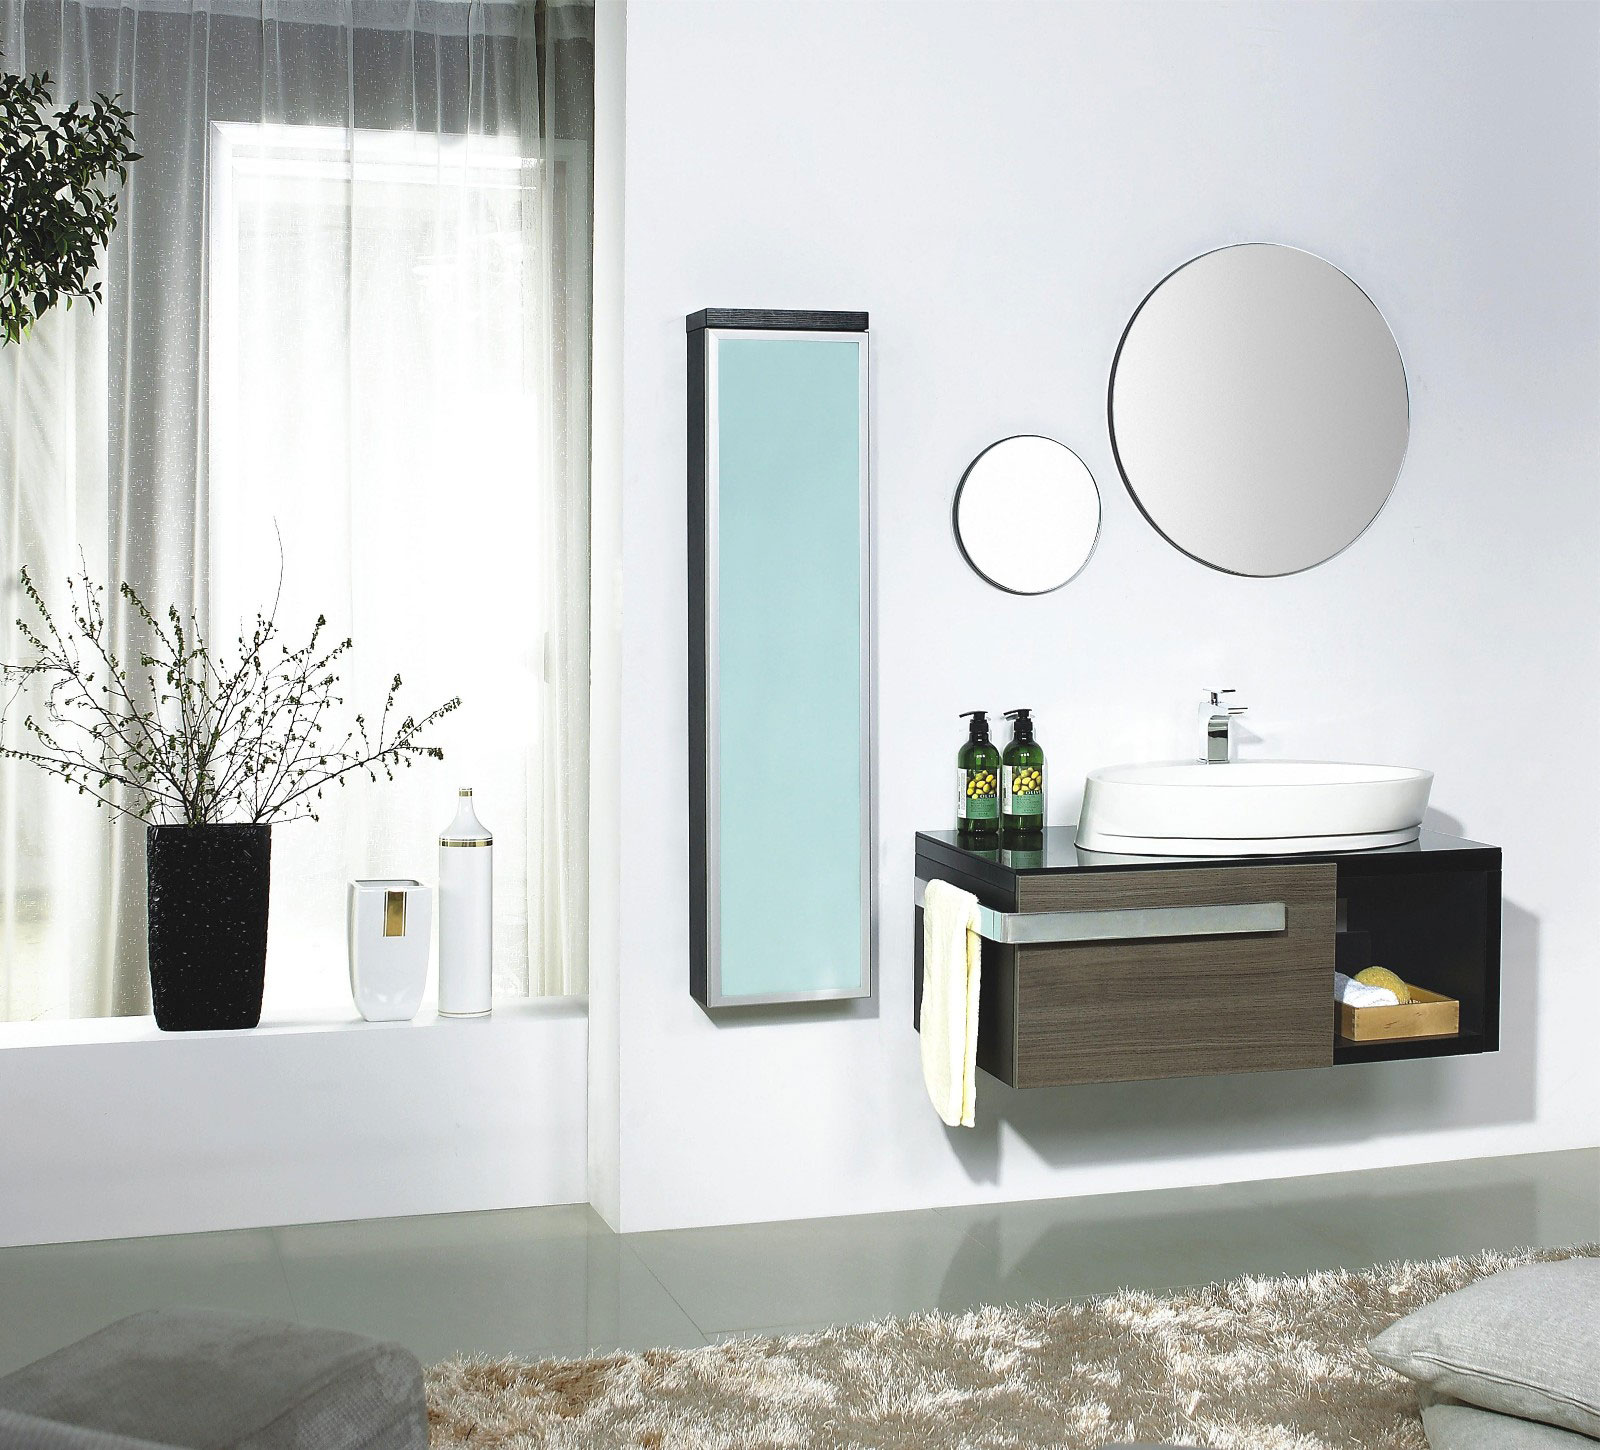 Modern Bathroom Using Small Modern Bathroom Vanities Design Using Wooden Material Completed With Oval Wall Mirror Design Ideas Bathroom Modern Bathroom Vanities As Amusing Interior For Futuristic Home